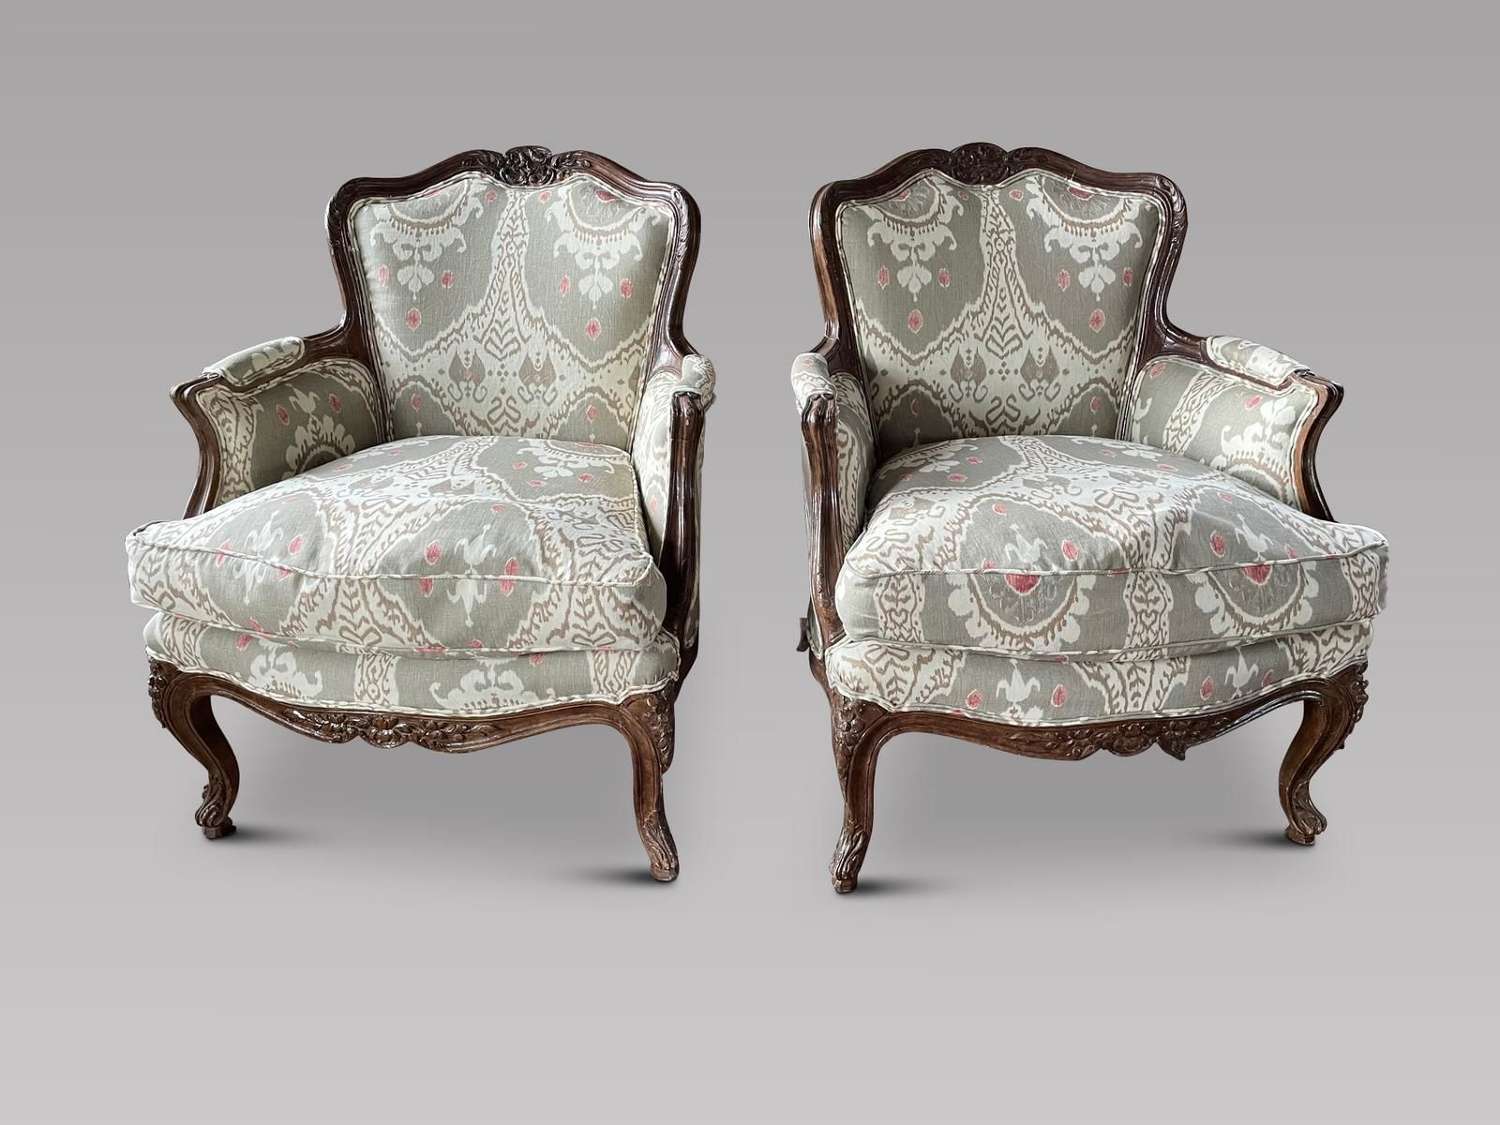 Pair of Louis XVI Style 19th Century Bergere Chairs